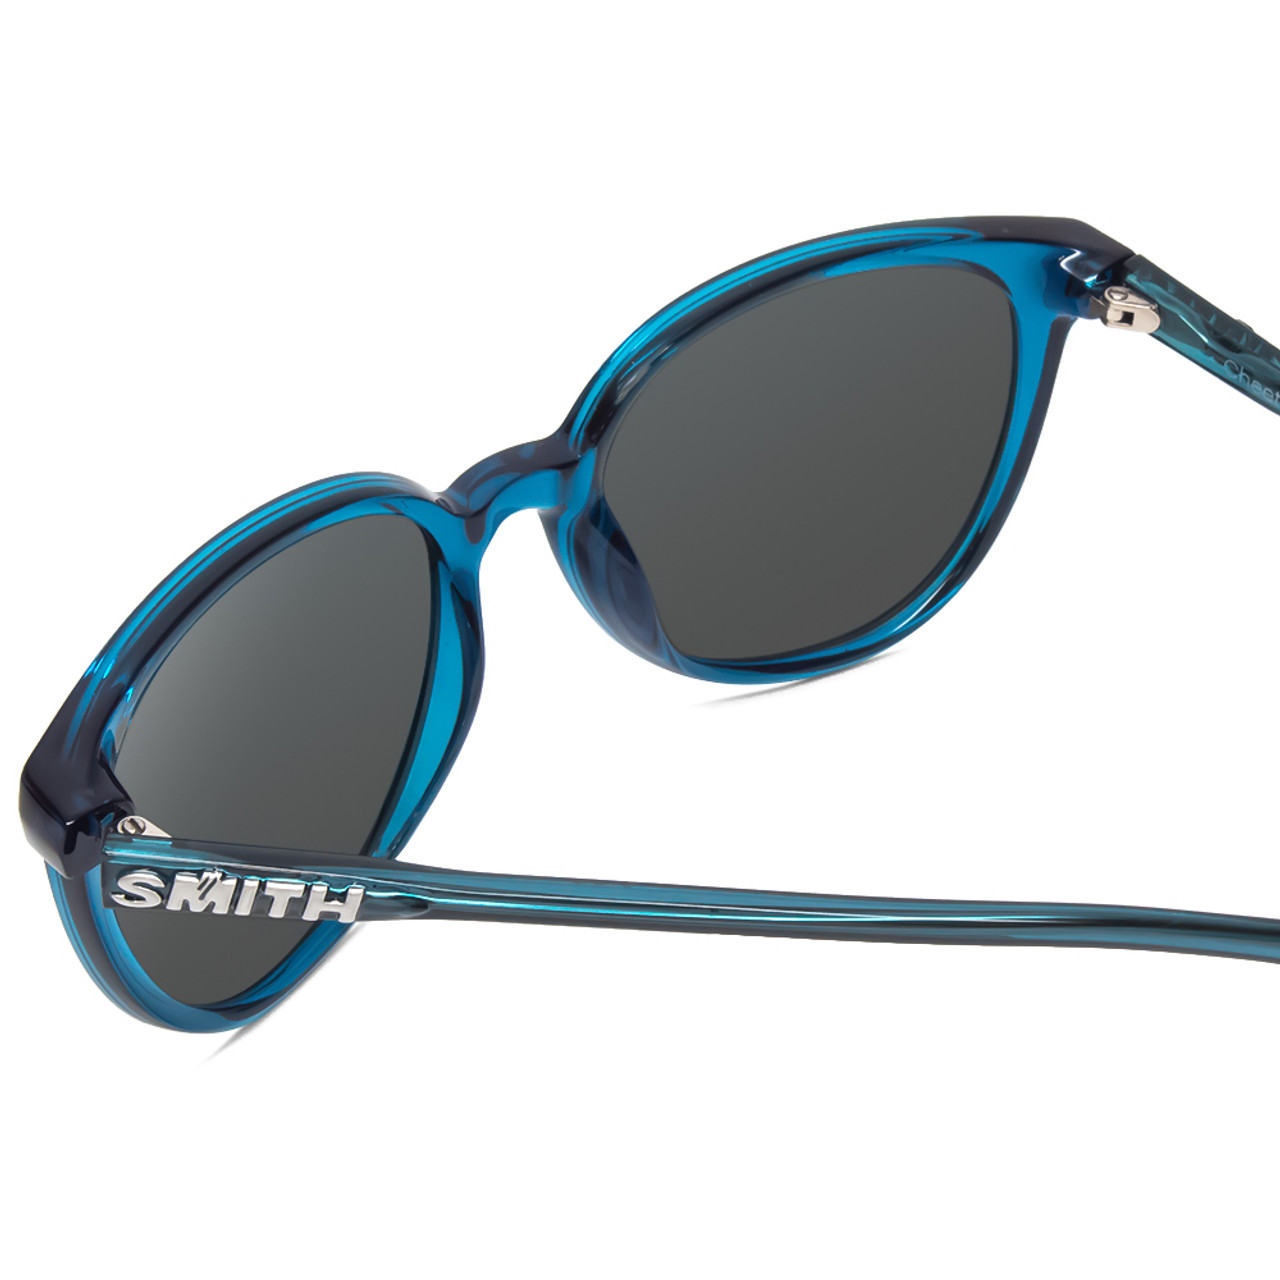 Close Up View of Smith Cheetah Ladies Cateye Sunglasses in Cool Blue Crystal/Polarized Gray 54 mm